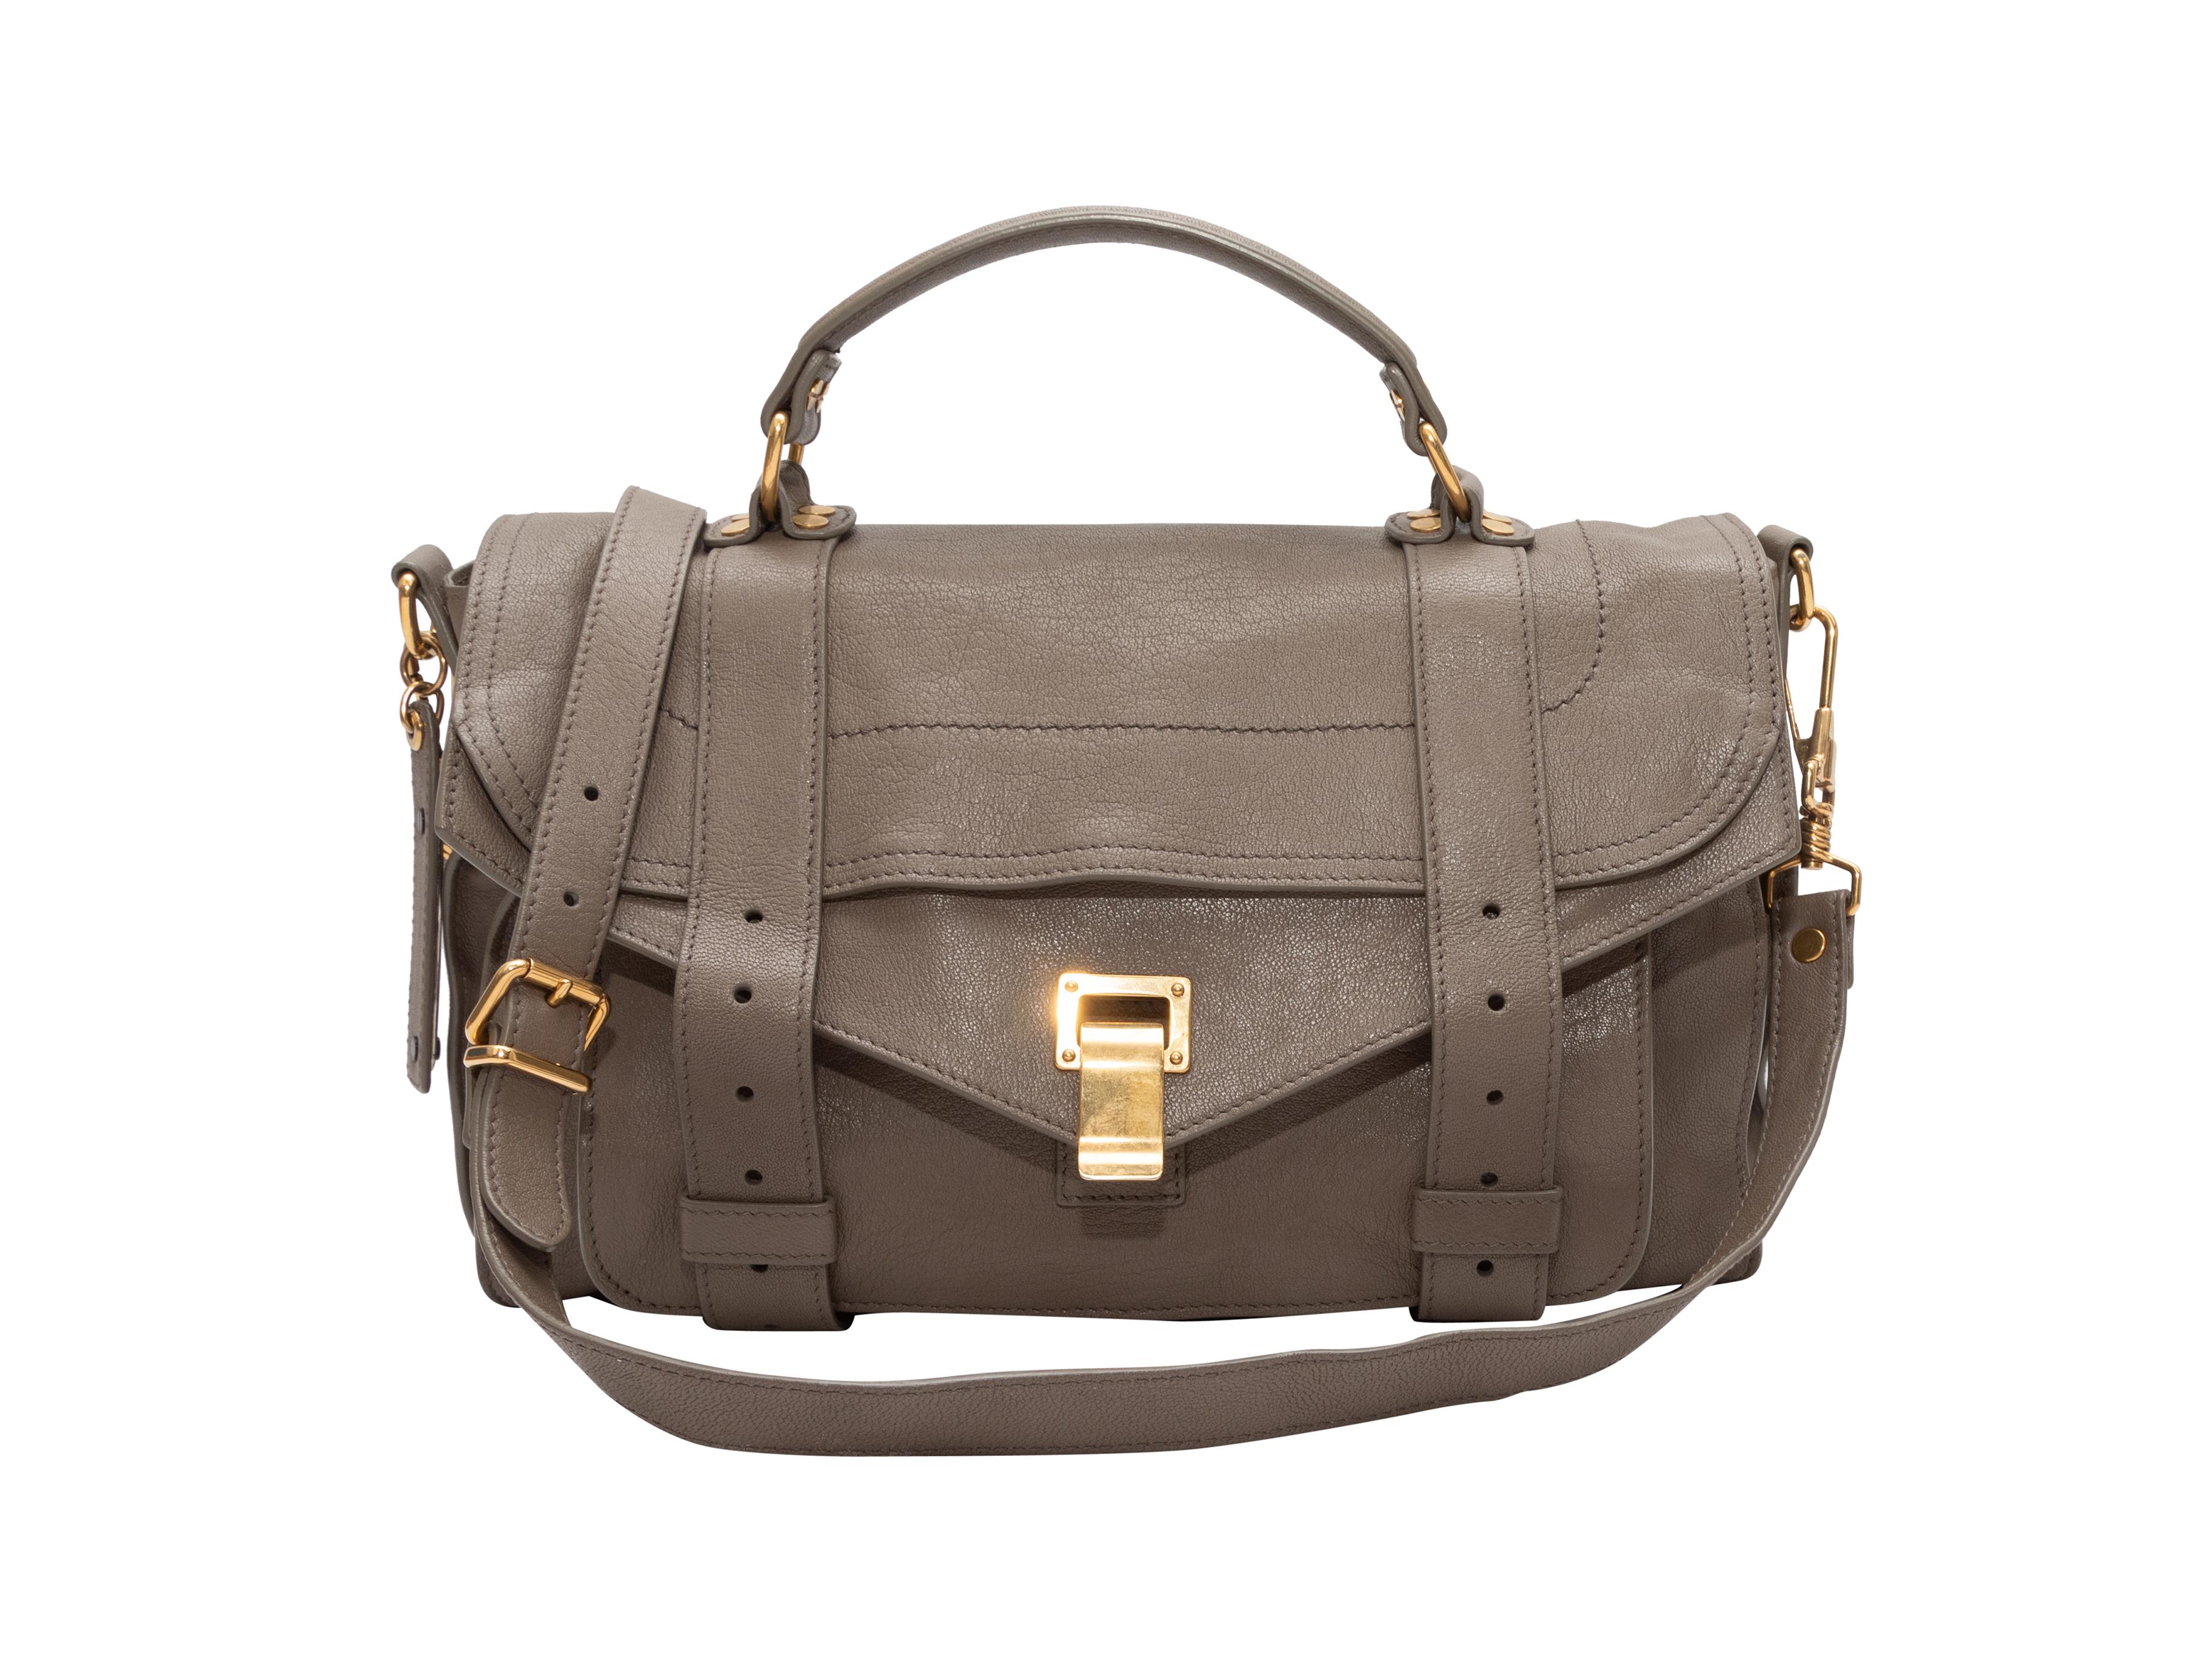 Taupe Proenza Schouler PS1 Messenger Bag. The PS1 Messenger Bag features a leather body, gold-tone hardware, a single flat top handle, a single flat shoulder strap, a single exterior back zip pocket, and front flap closure. 13.5